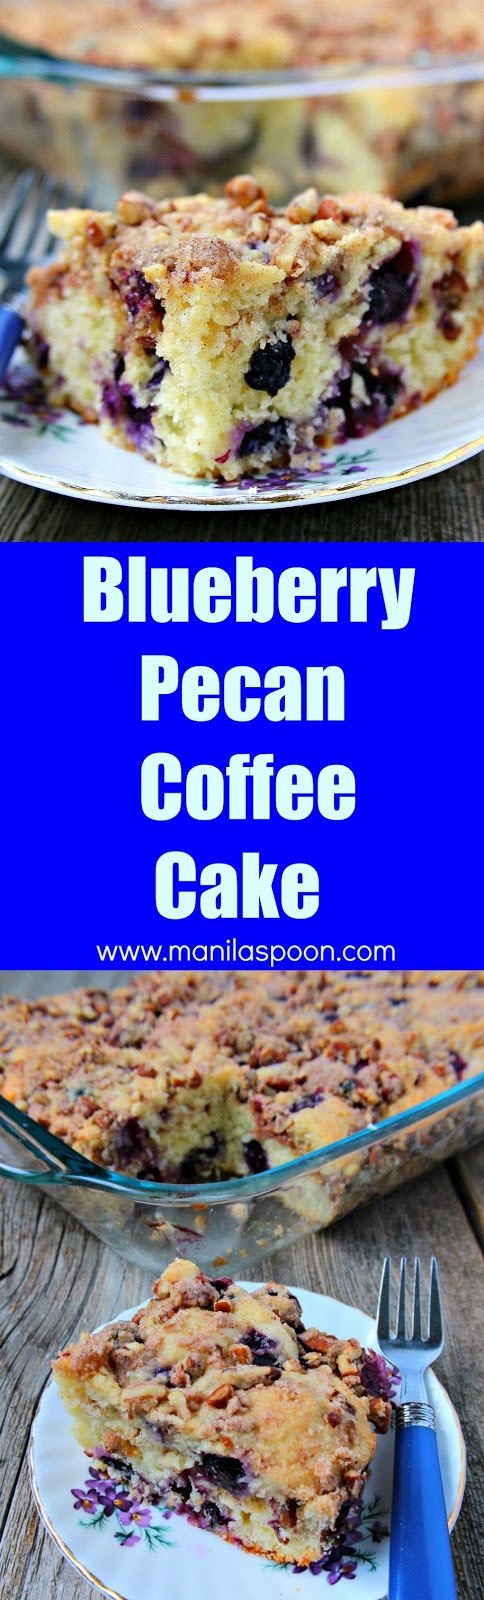 With juicy blueberries for extra sweetness and pecans for added crunch and flavor this is our ultimate breakfast and coffee cake. | manilaspoon.com